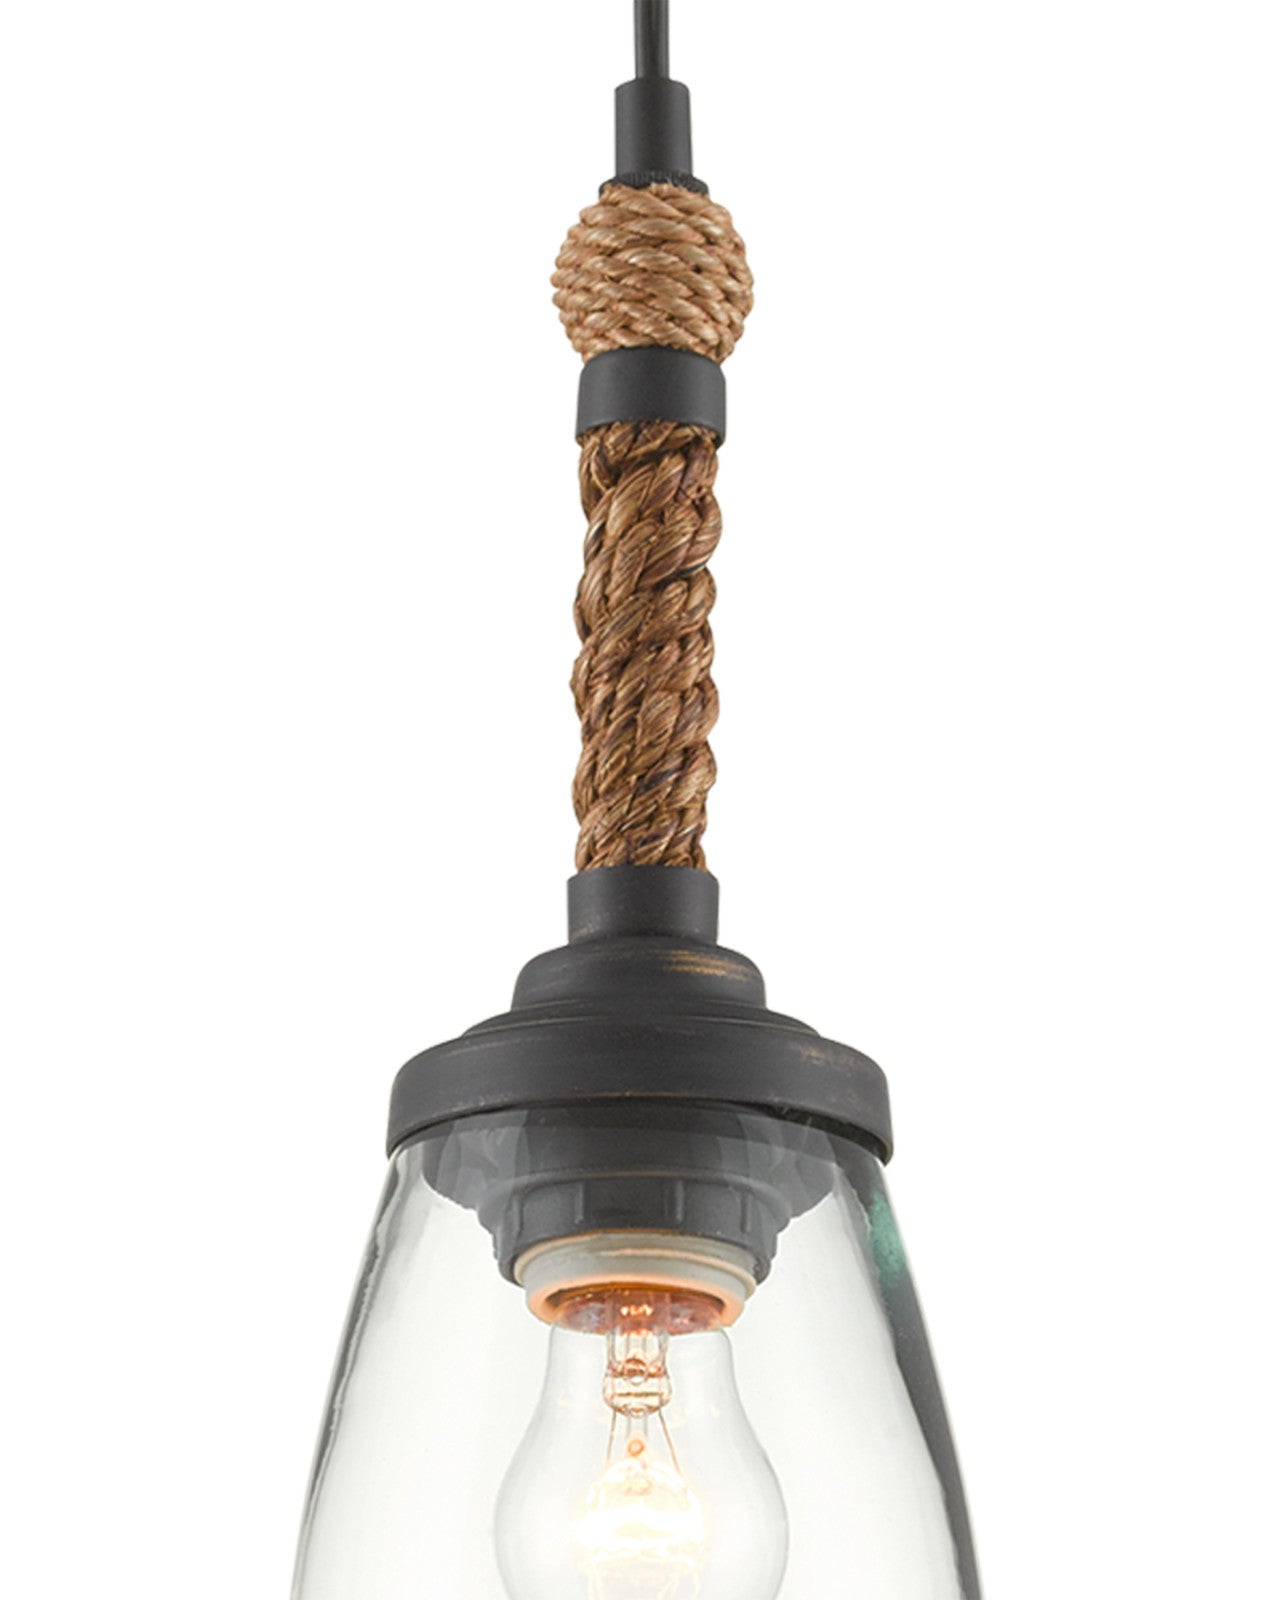 Hightider Pendant by Currey & Co.